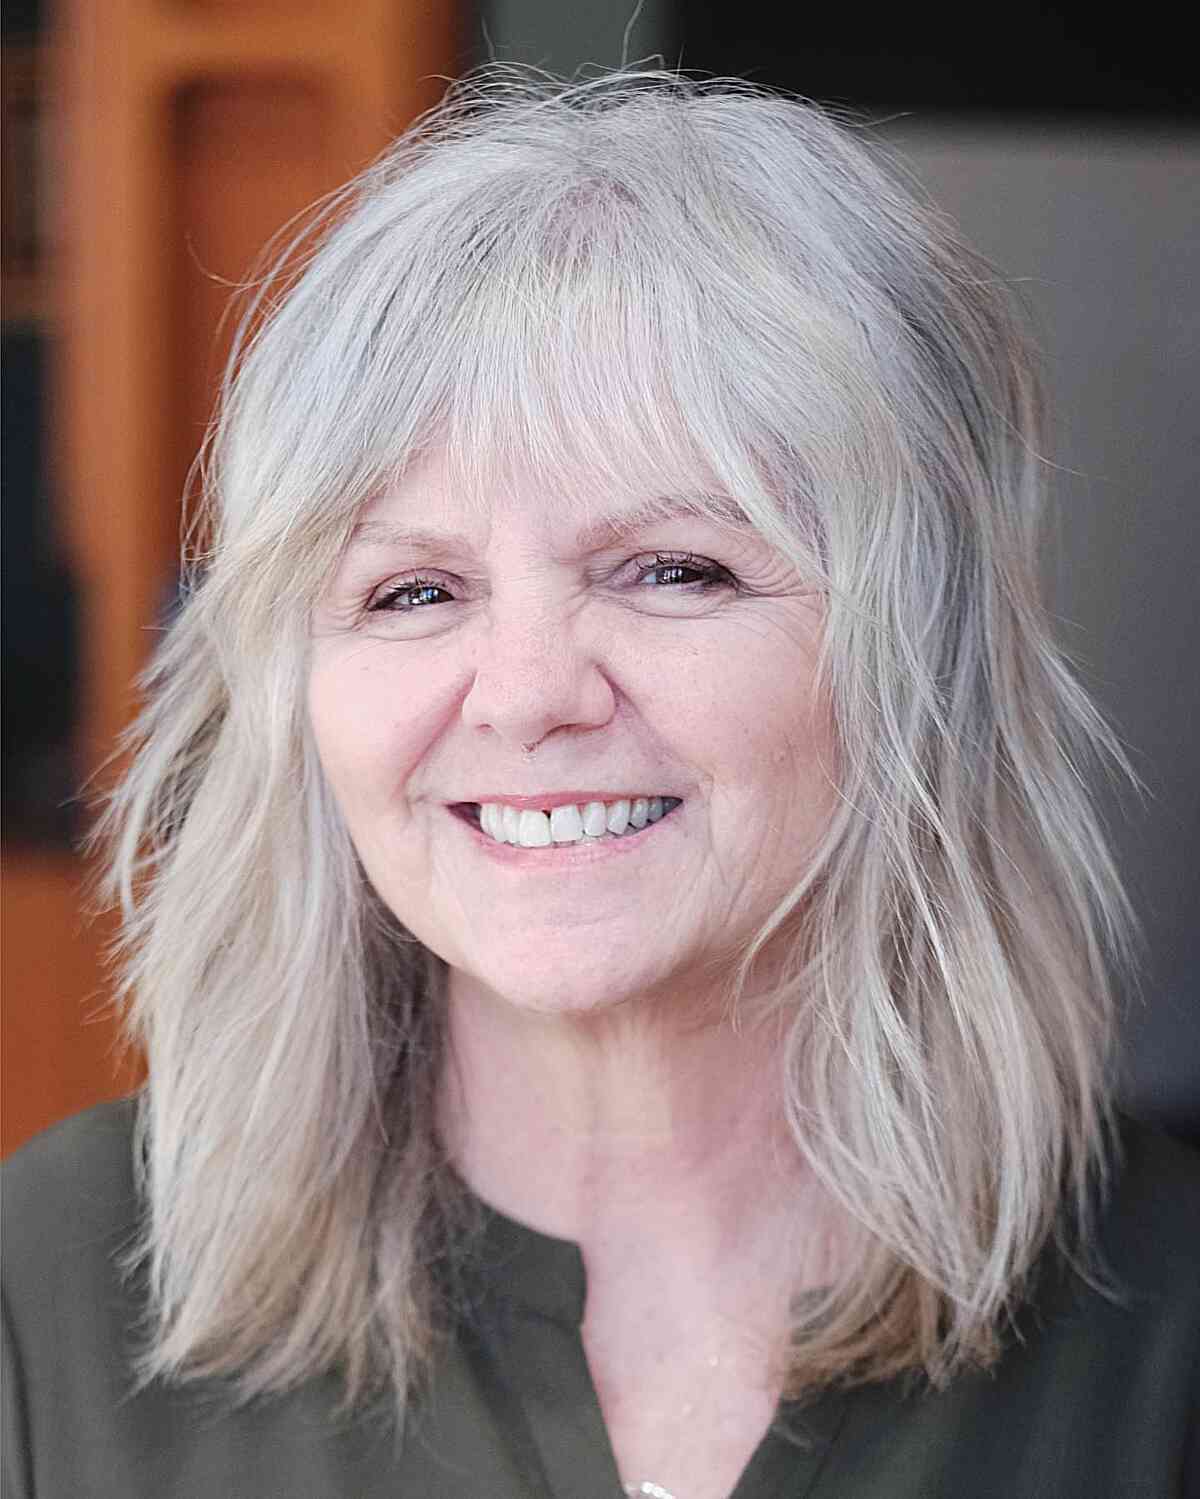 Layered Shaggy Medium-Length Cut for Round-Faced Women Aged 60